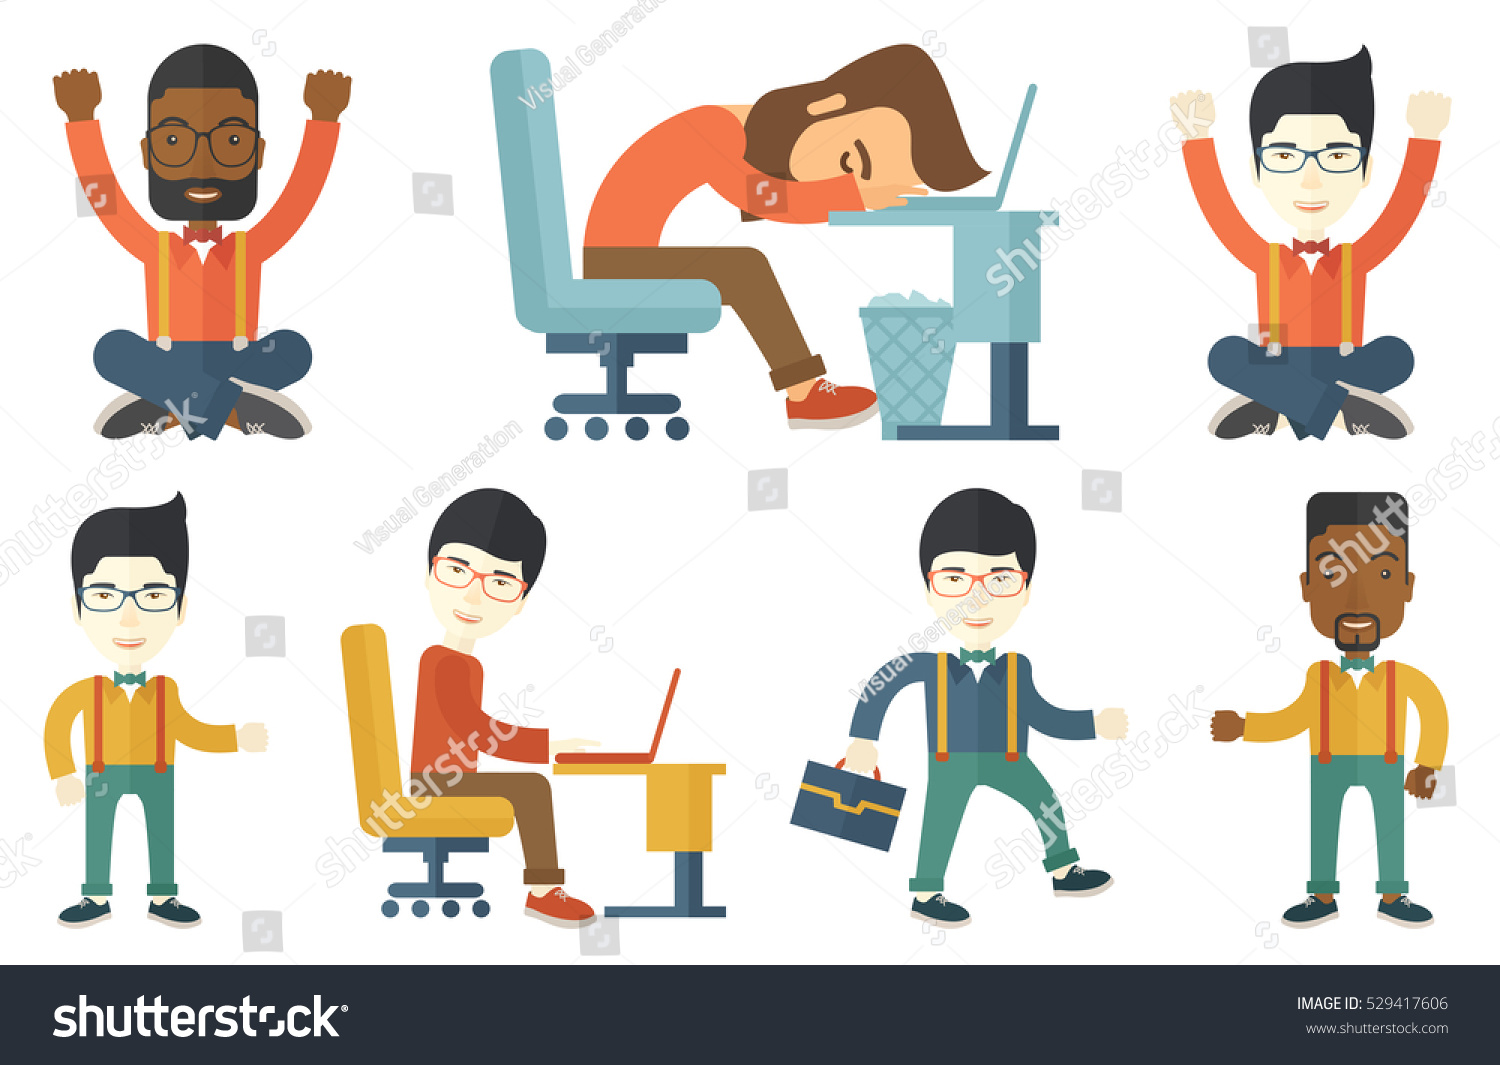 Free PNG Overworked Employees - 73084